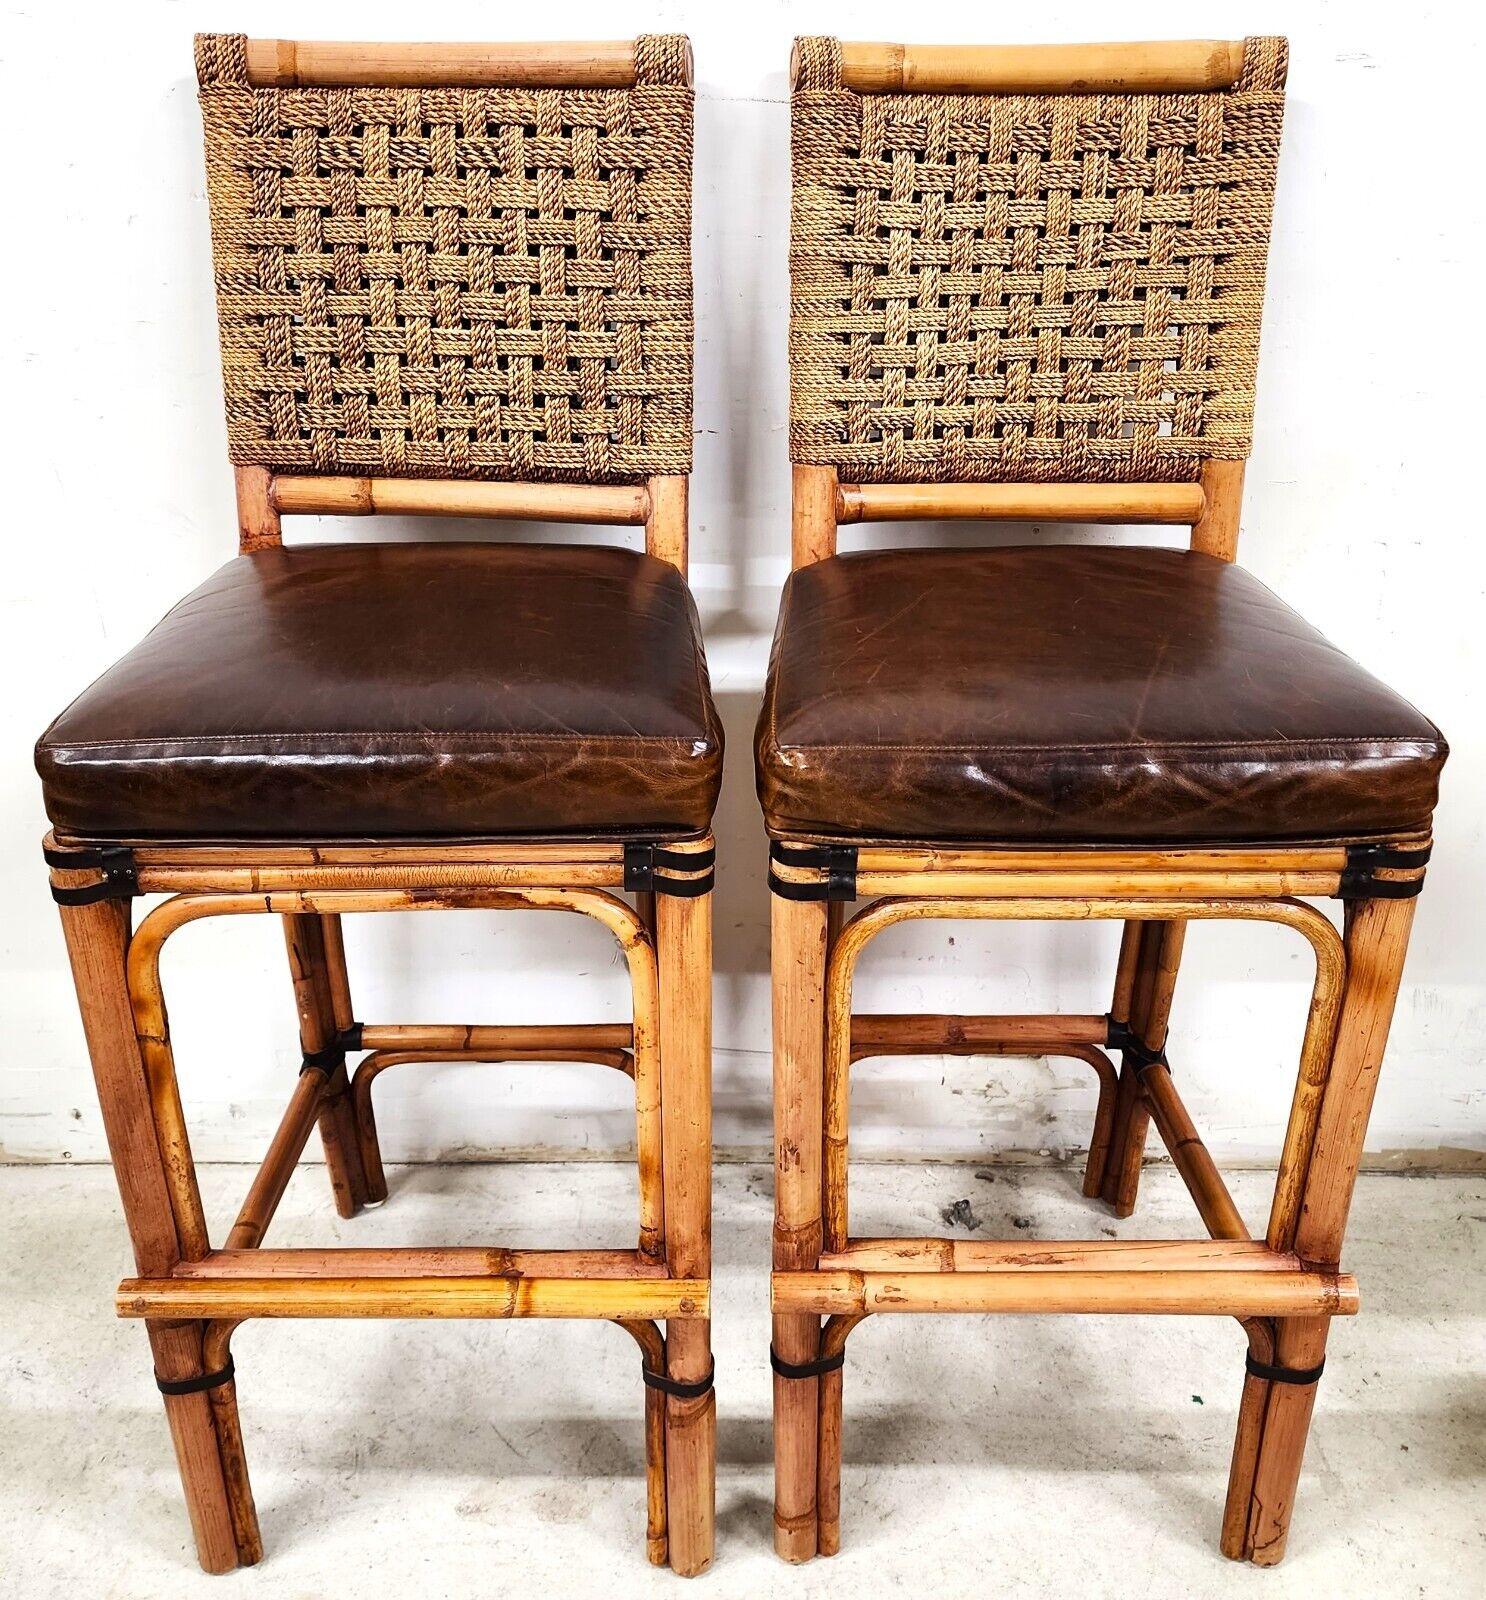 For FULL item description click on CONTINUE READING at the bottom of this page.

Offering One Of Our Recent Palm Beach Estate Fine Furniture Acquisitions Of A 
Set of 2 Bamboo Leather Barstools with Rattan & Braided Rope by PALECEK

Approximate